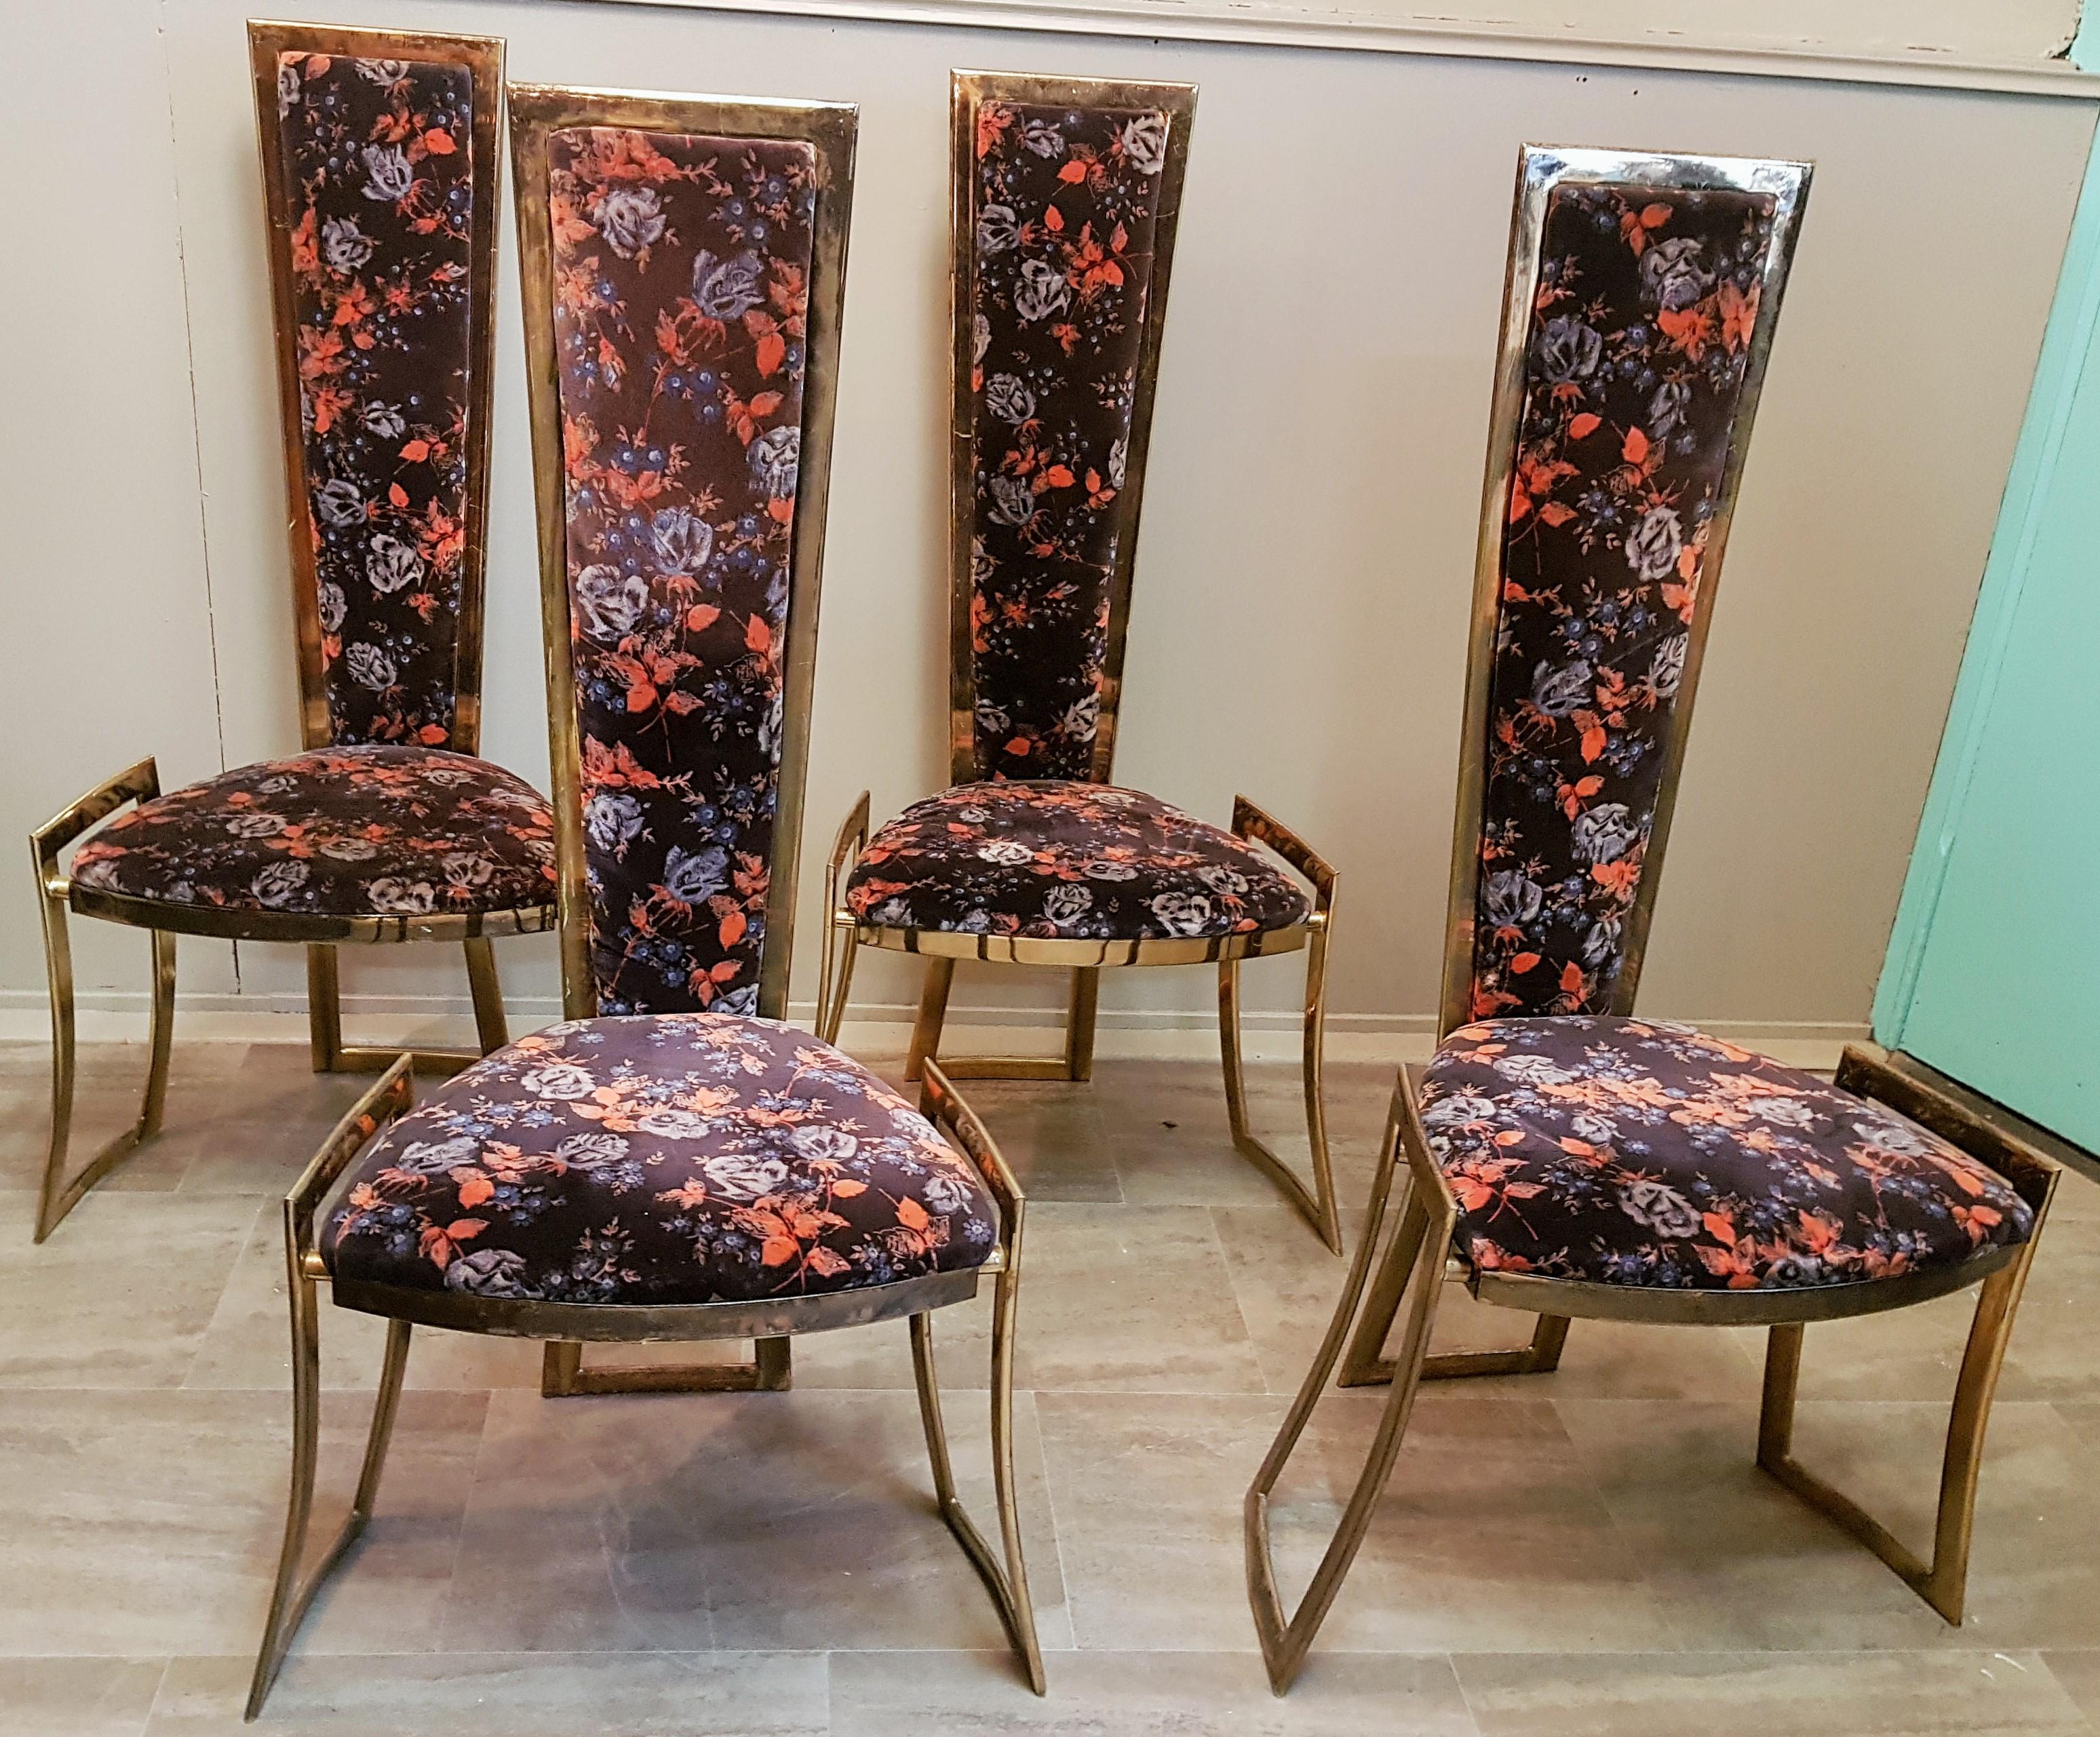 Midcentury high back dining room brass chairs Brutalist Hollywood Regency, France, 1960s.
in the style of Maison Charles, Maison Bagues or Willy Rizzo.

Original condition, solid and stabile, very heavy.

Original upholstery/fabric, brass with